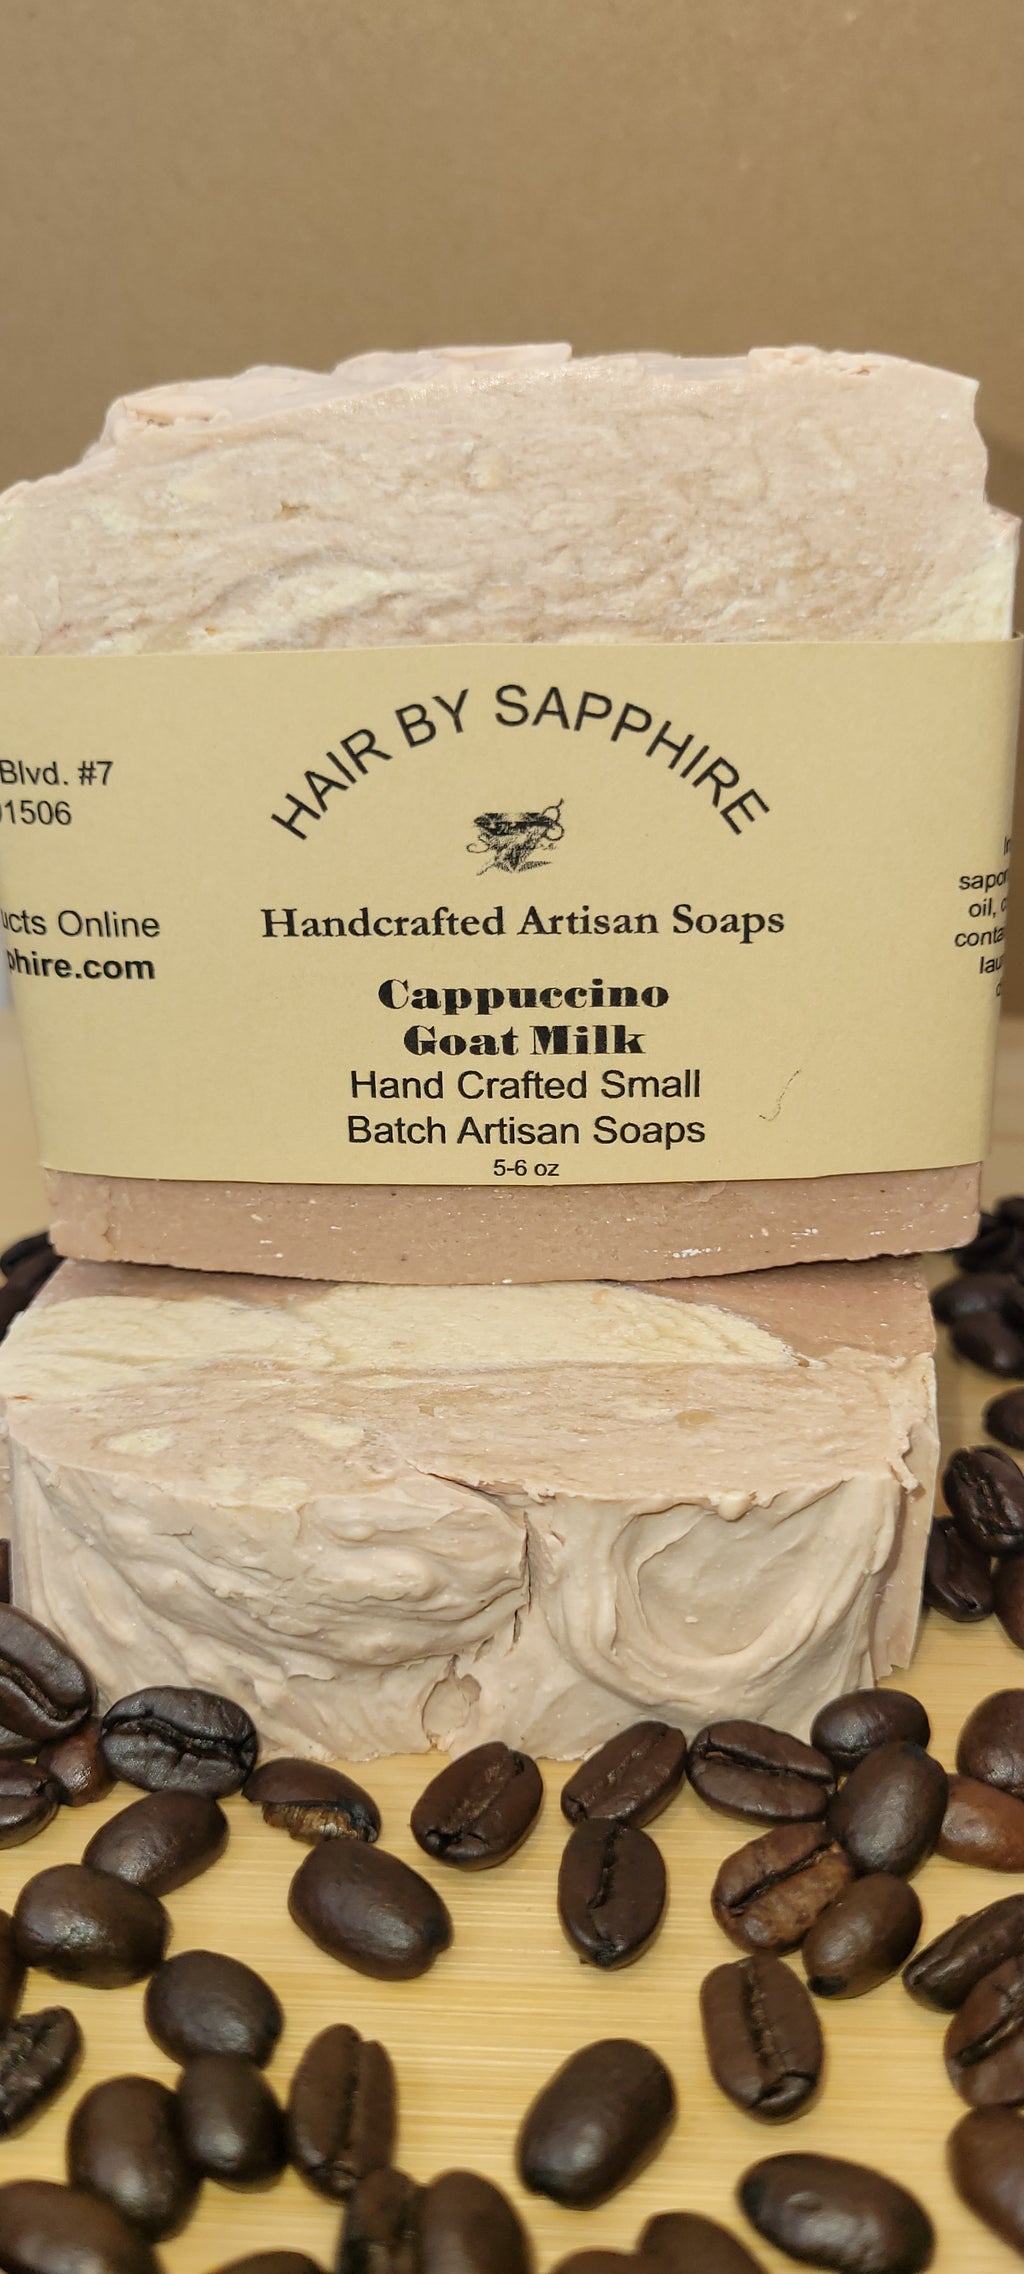 Cappuccino Goat's Milk Anti-Aging Handcrafted Artisan Soap